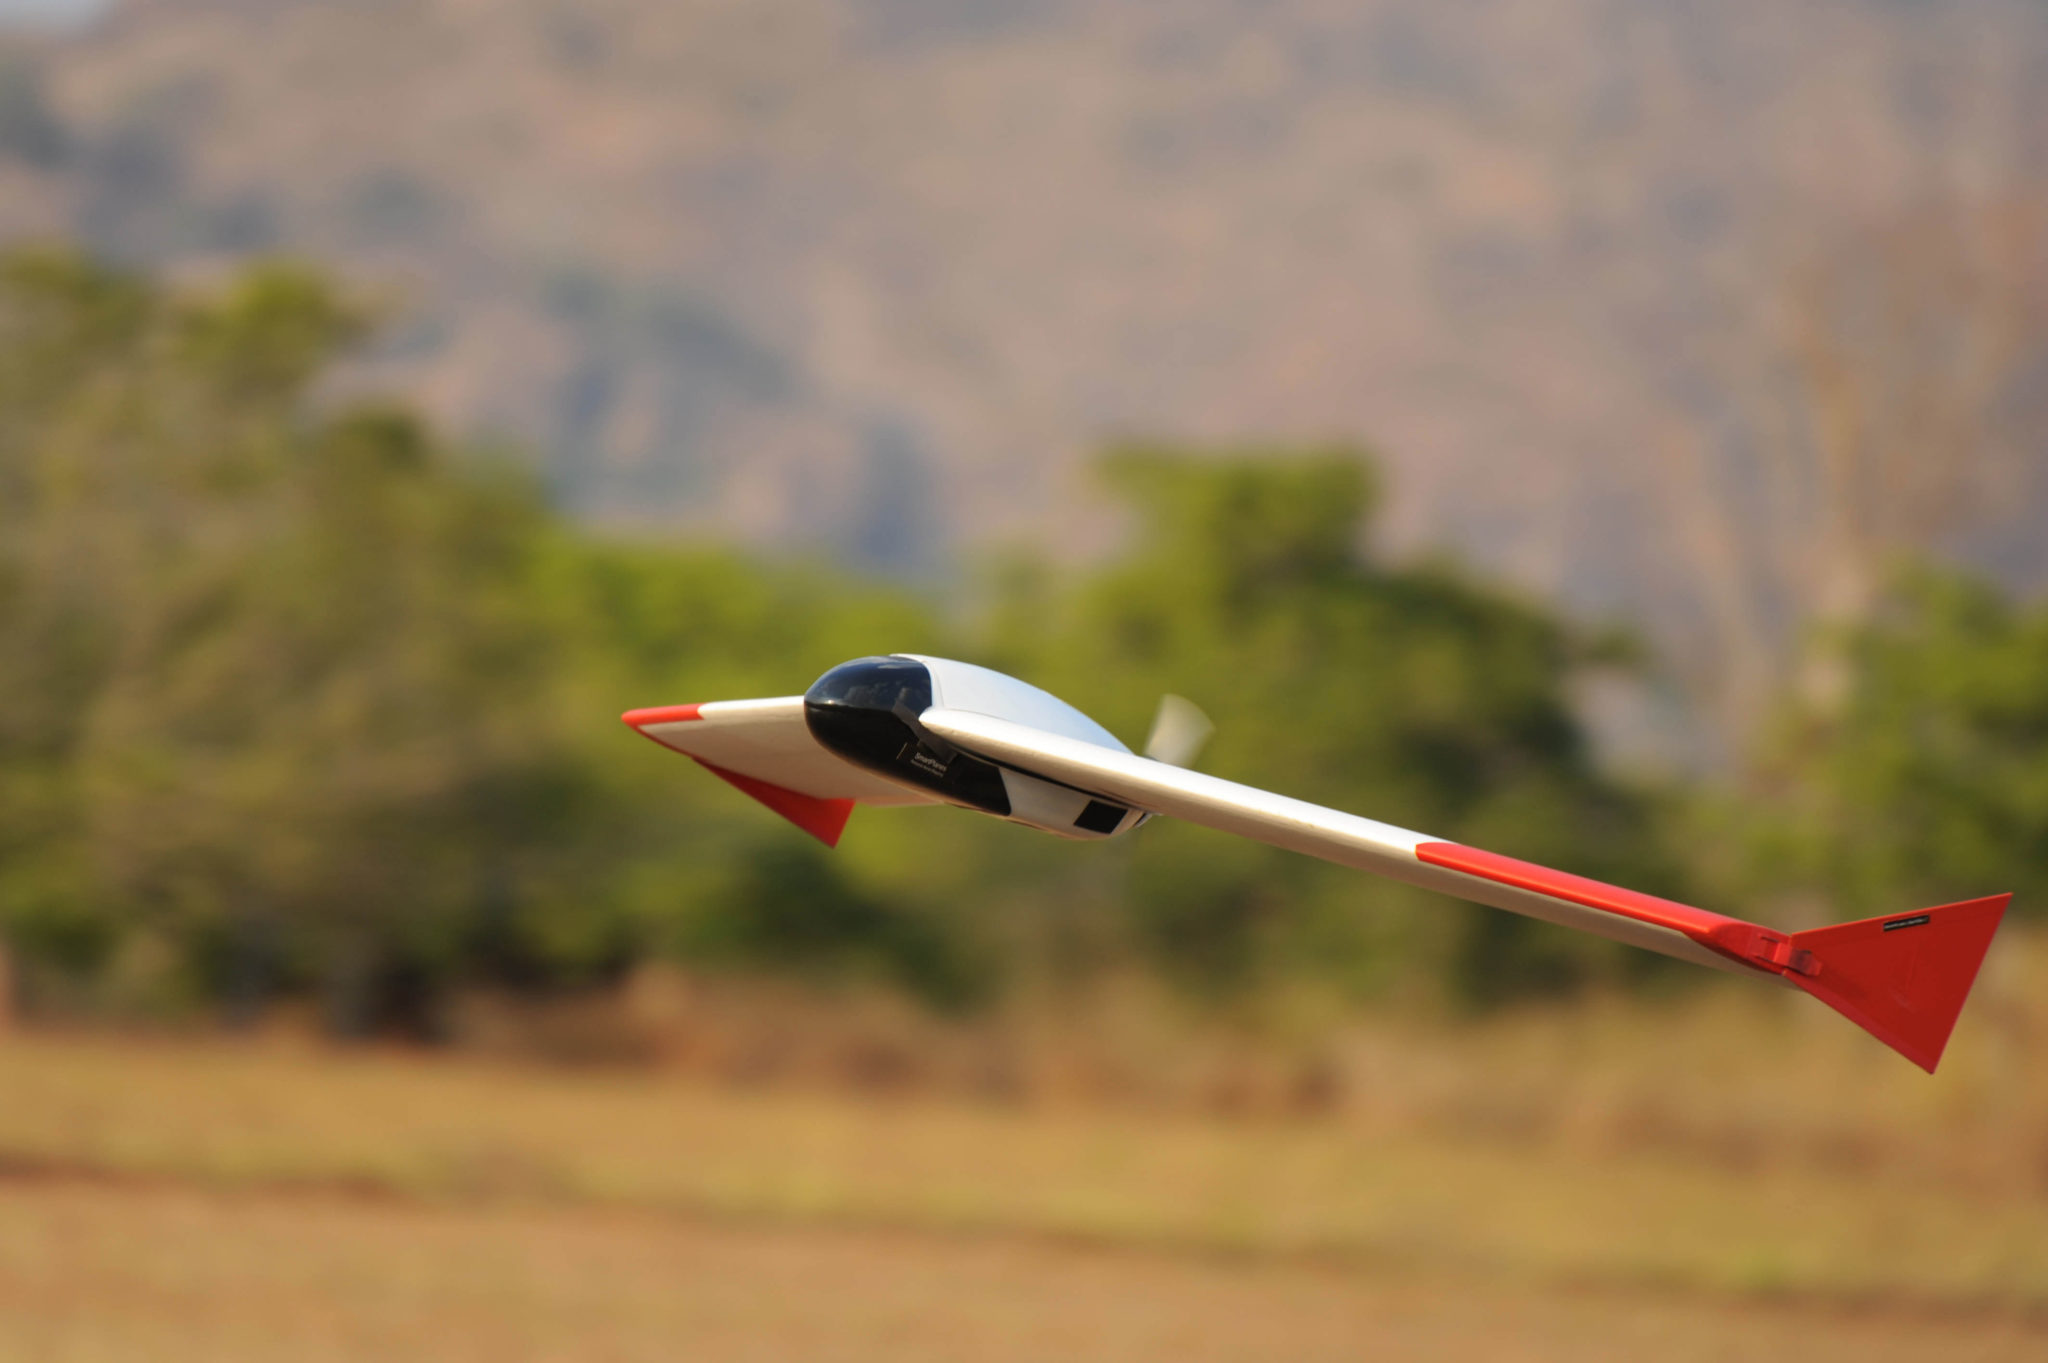 SmartPlanes take off with New Technology